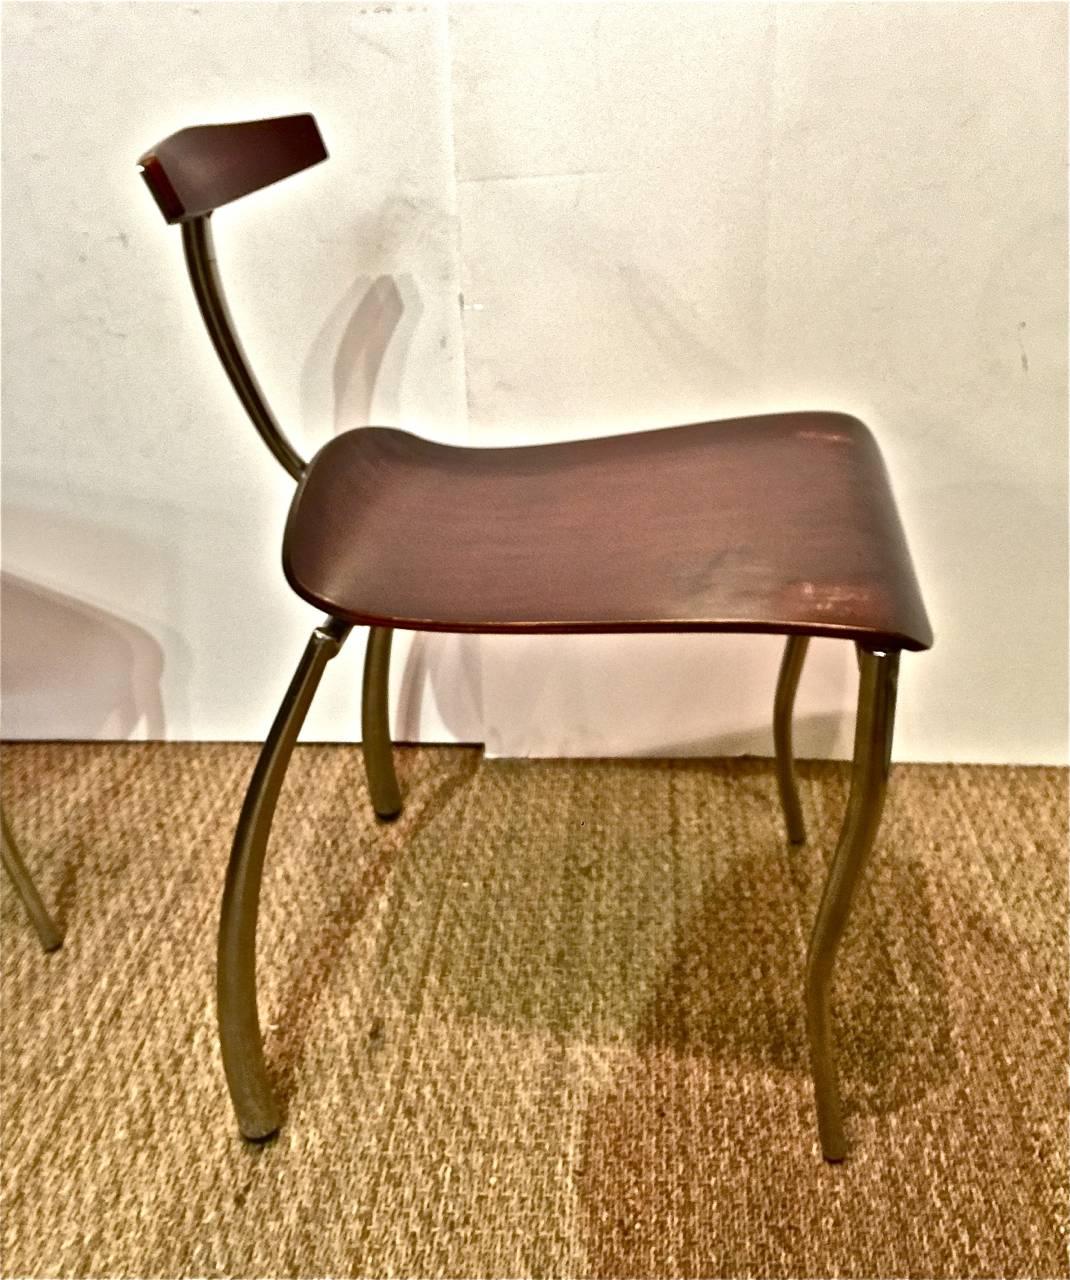 An unusual pair of Memphis attributed prototype side chairs that date to the 1980s. The chairs were crafted with forged and tubular steel and rosewood veneered plywood. Note the addition of the section of wood added as a support for the seat. Both